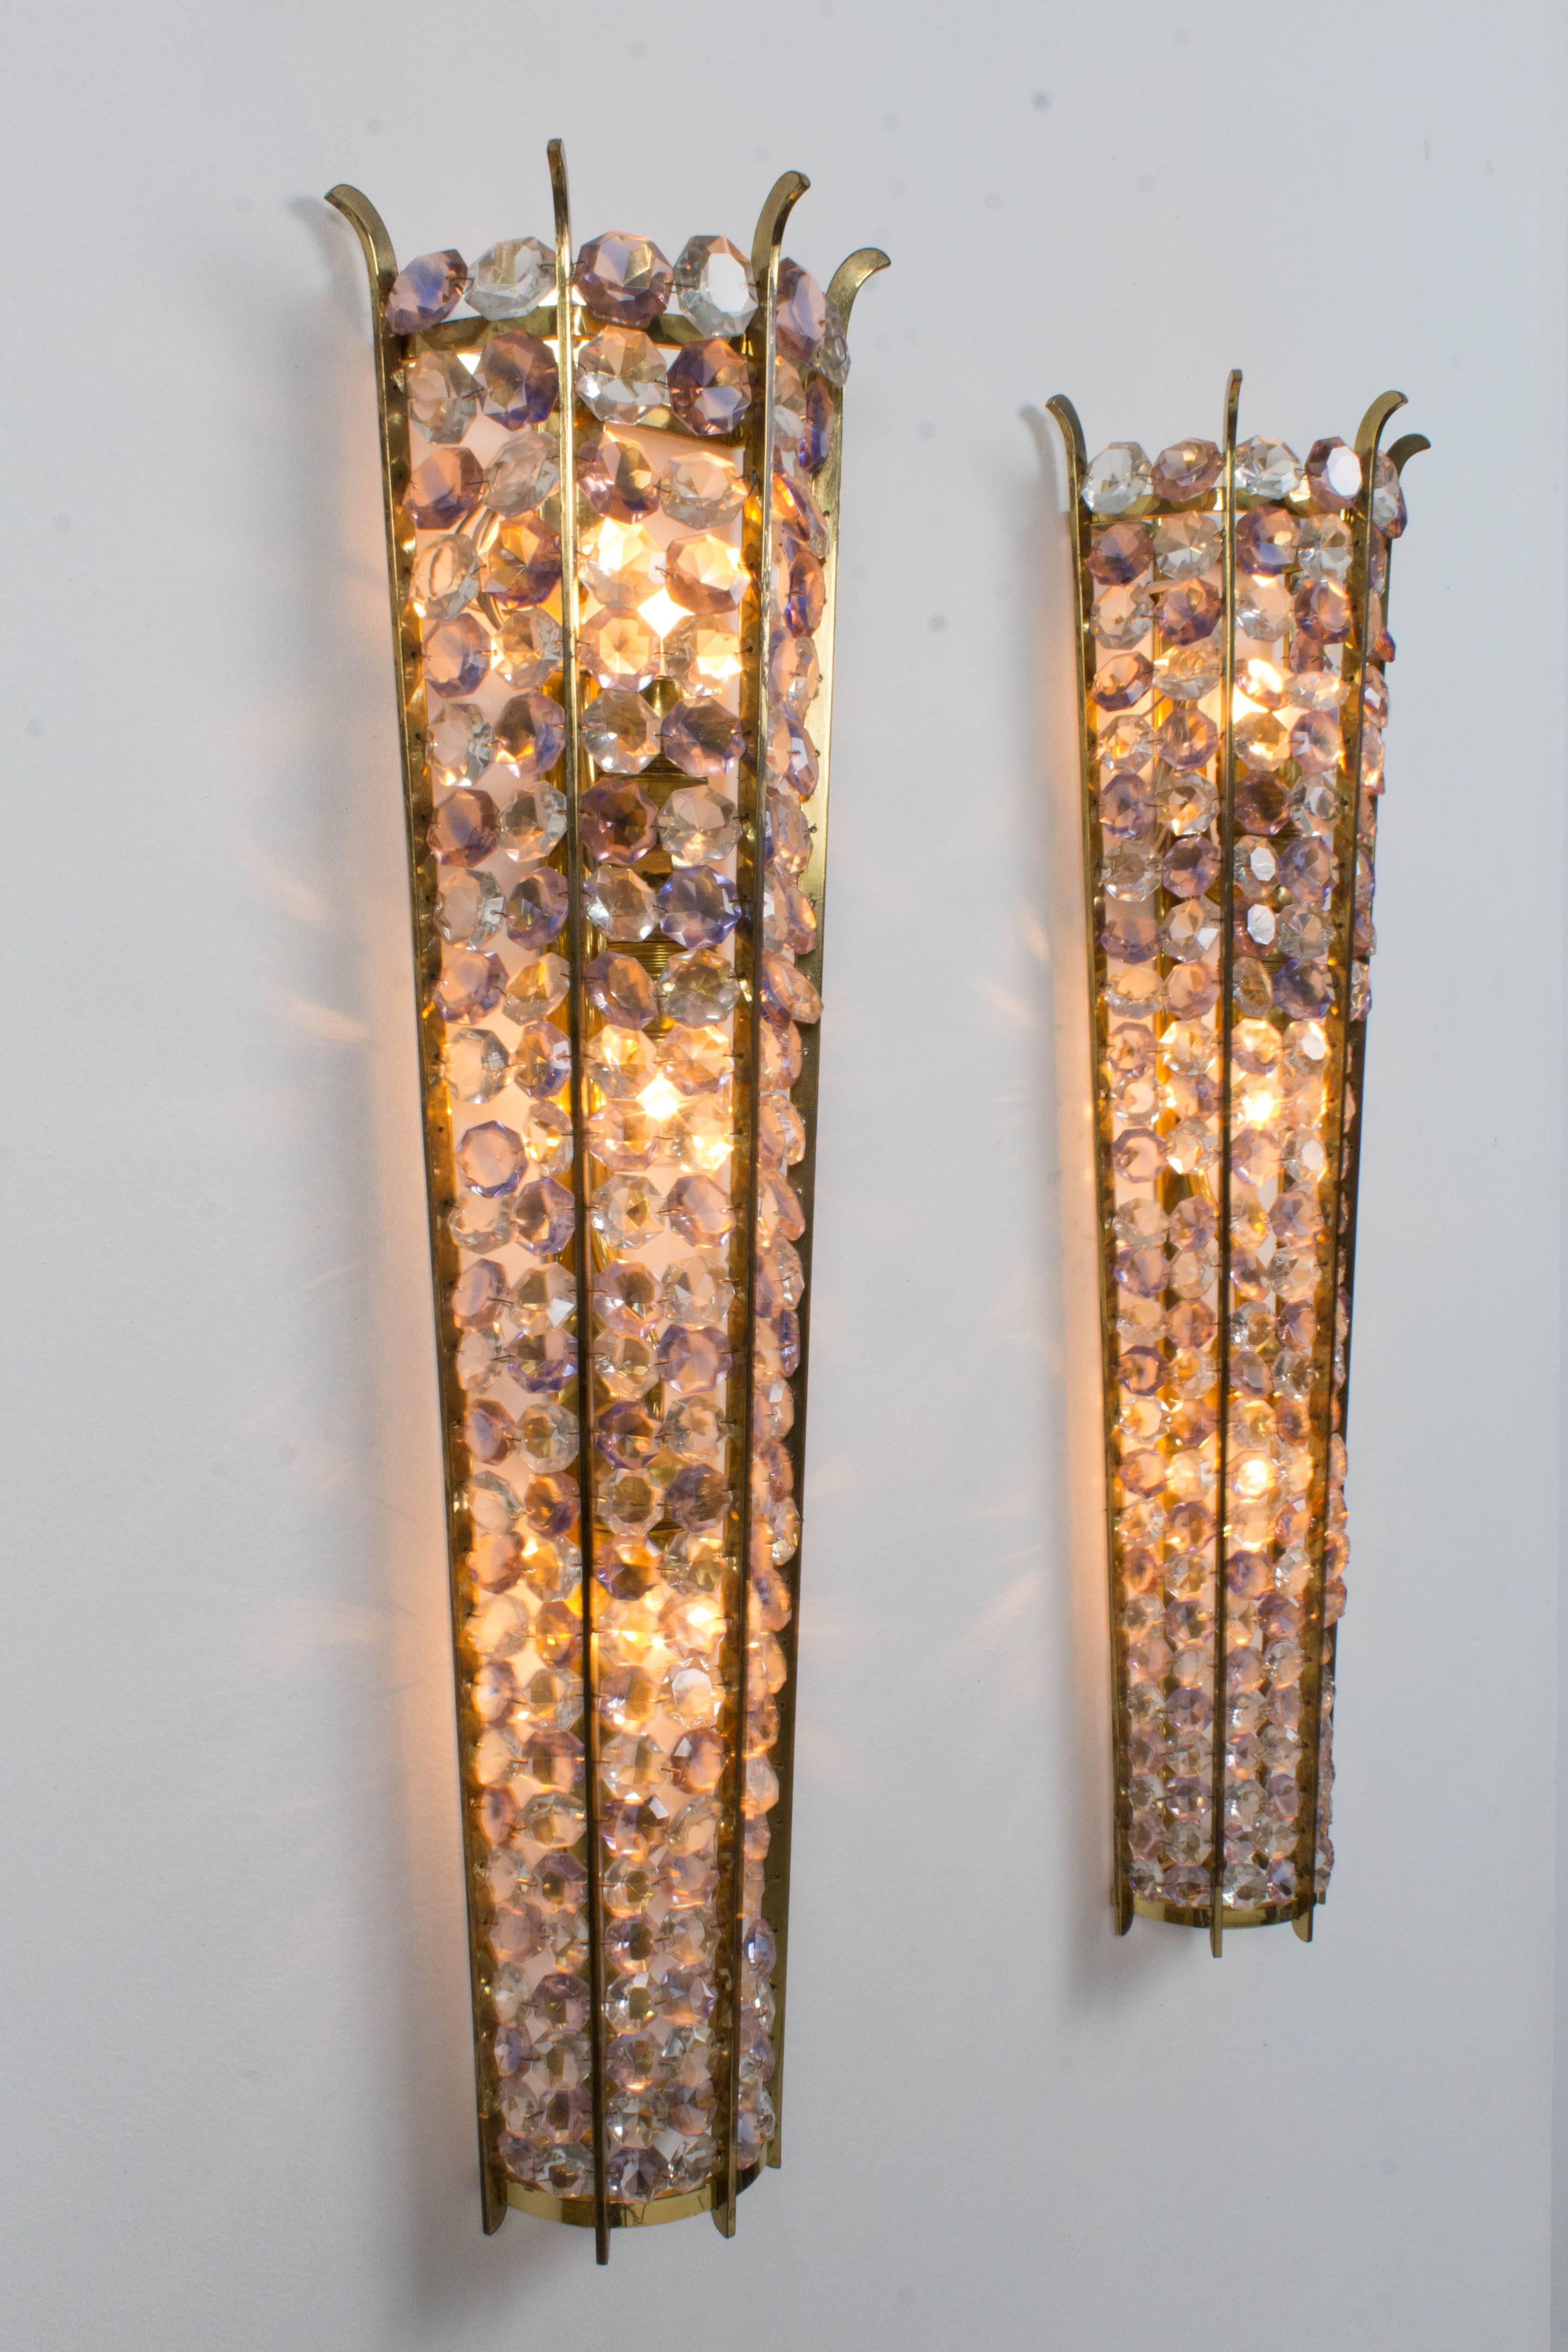 Magnificent pair of large Italian Mid-Century Modern sconces, 1970s.
Original solid brass frames with crystal glass.
Three original sockets.
In very good condition and the color of the glass is fabulous.